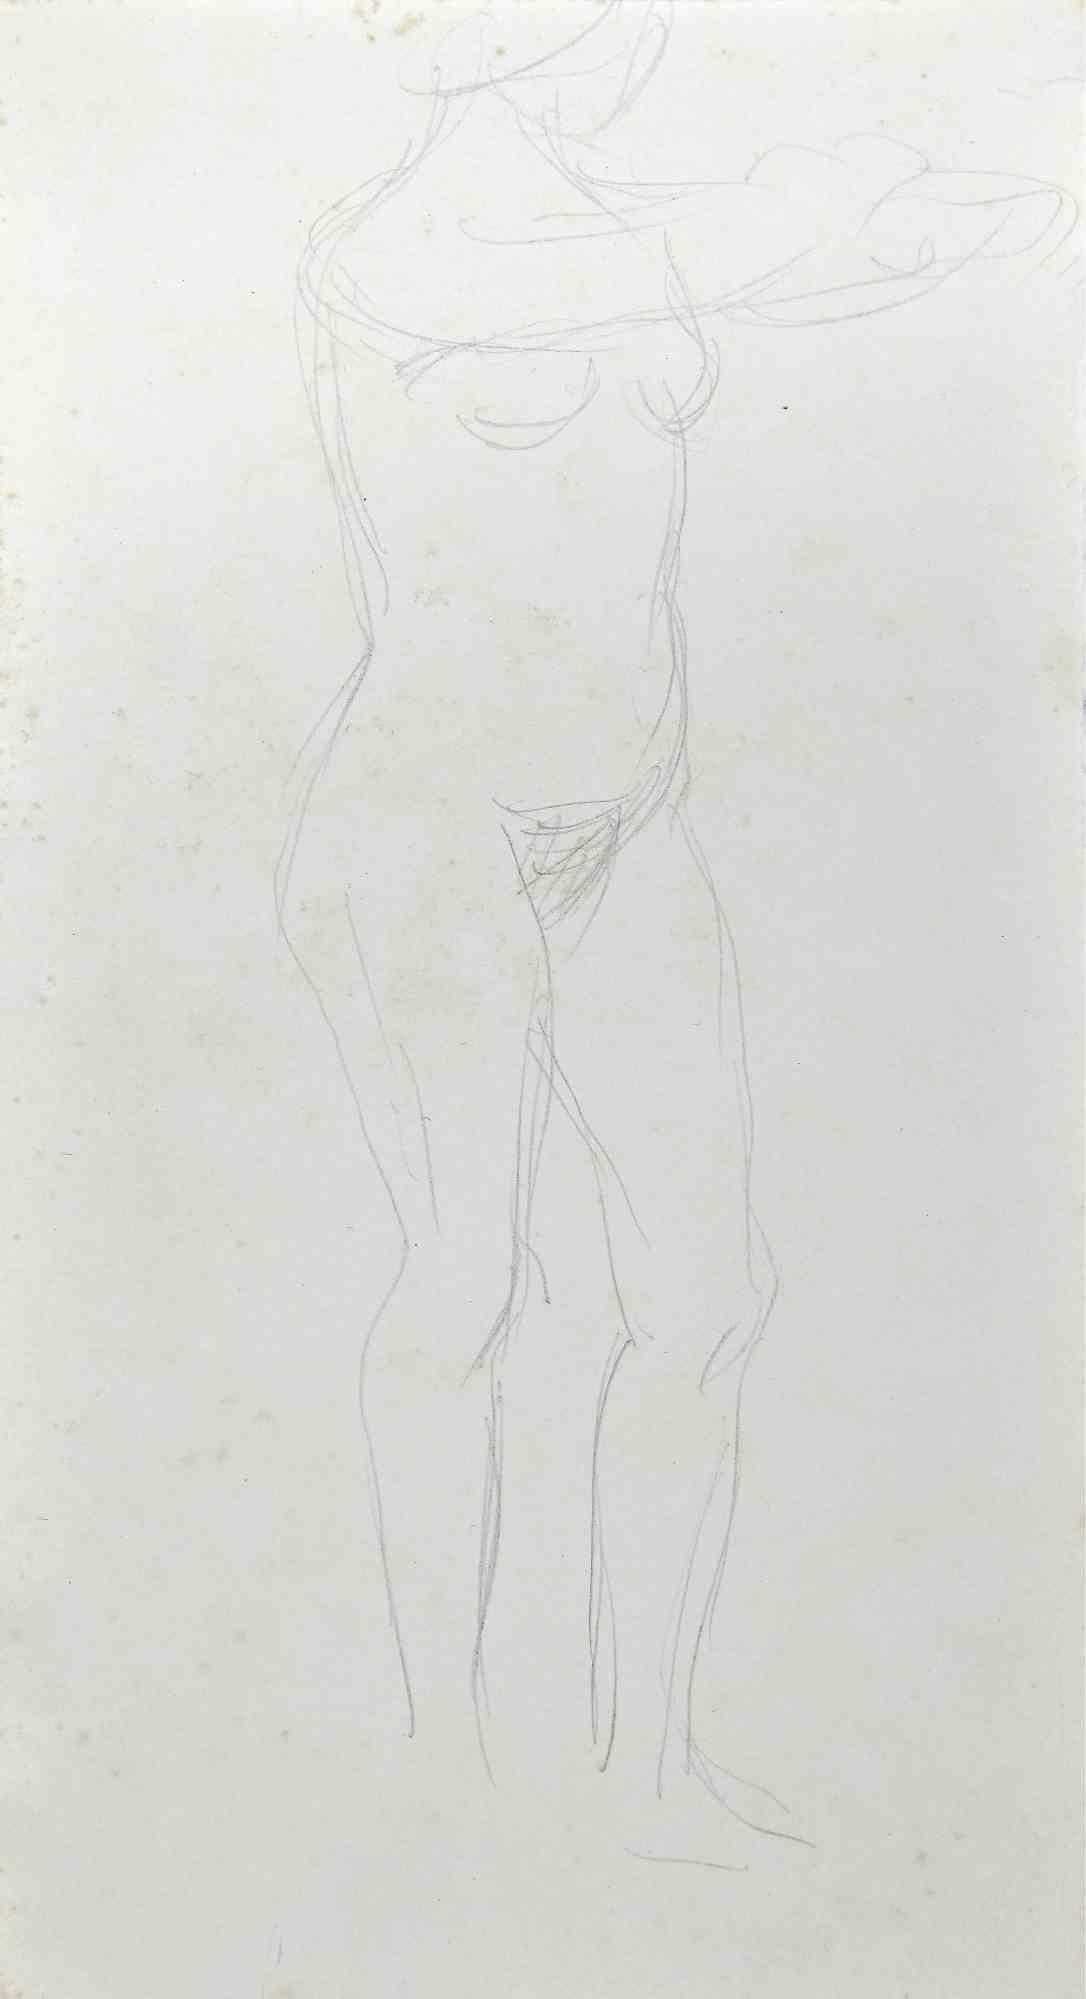 Unknown Figurative Art - The Posing Nude - Pencil Drawing - Early 20th Century